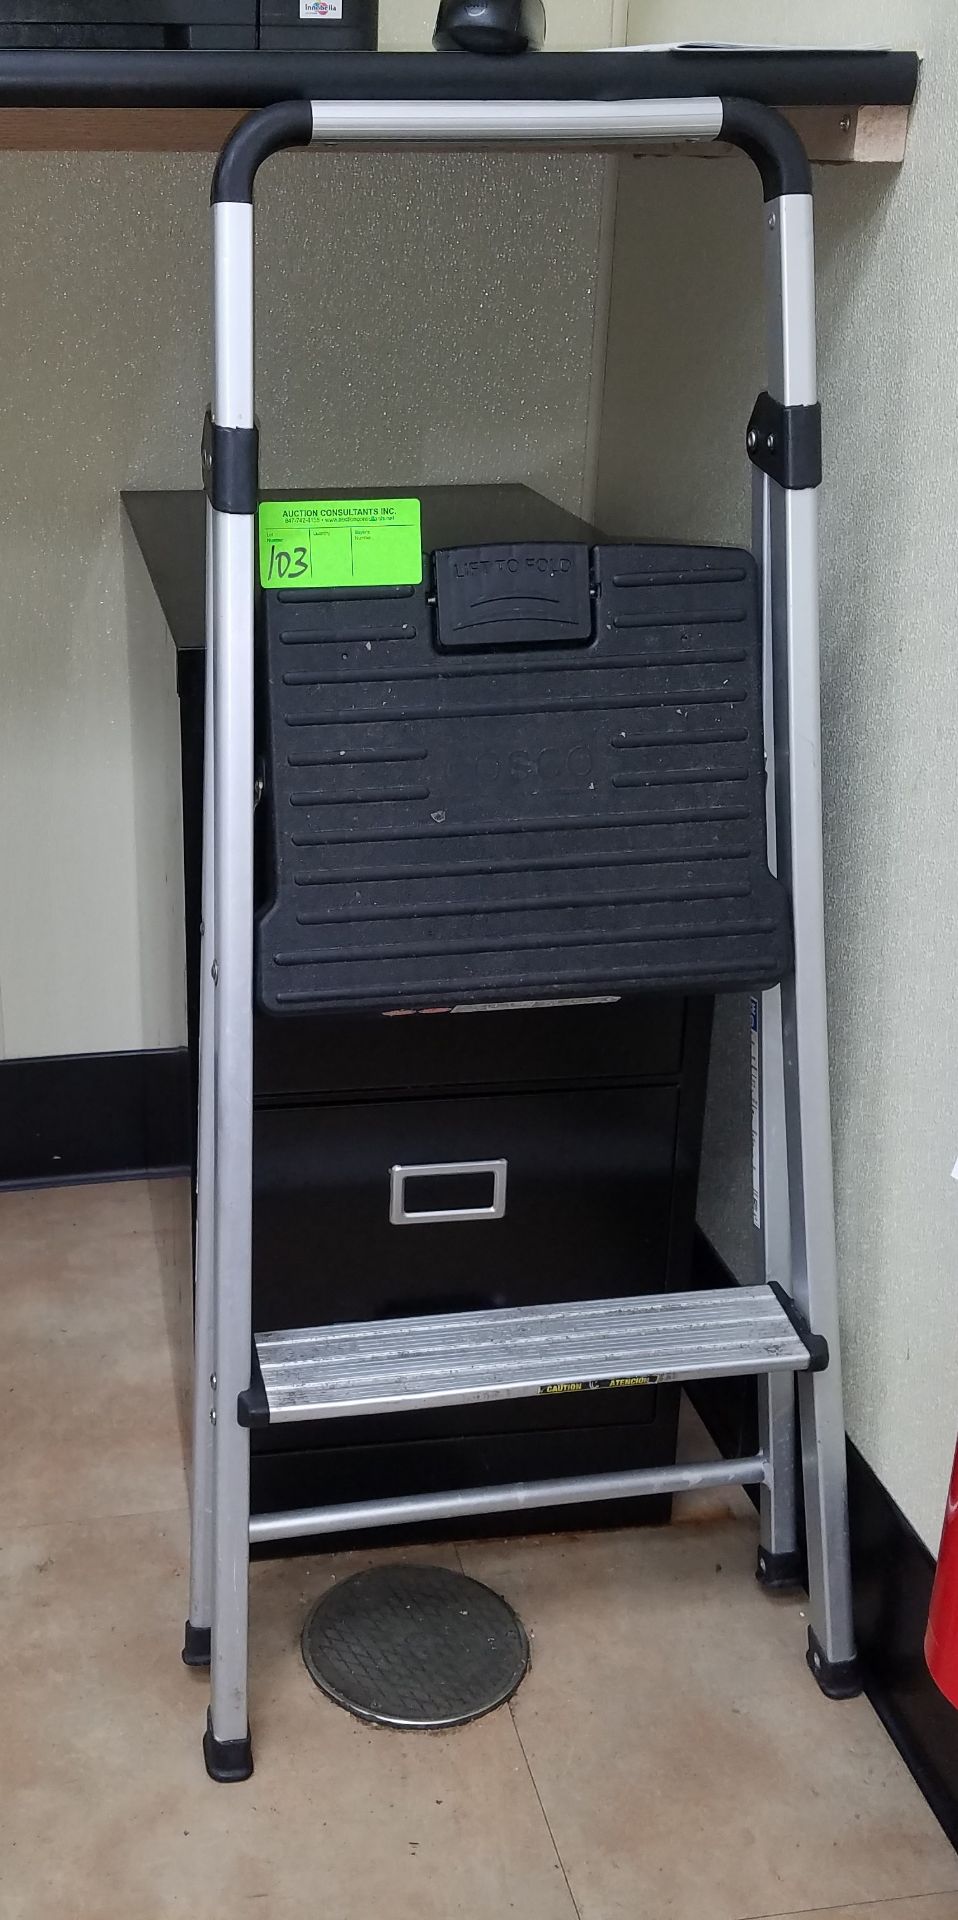 Cosco ladder and 2 drawer file cabinet